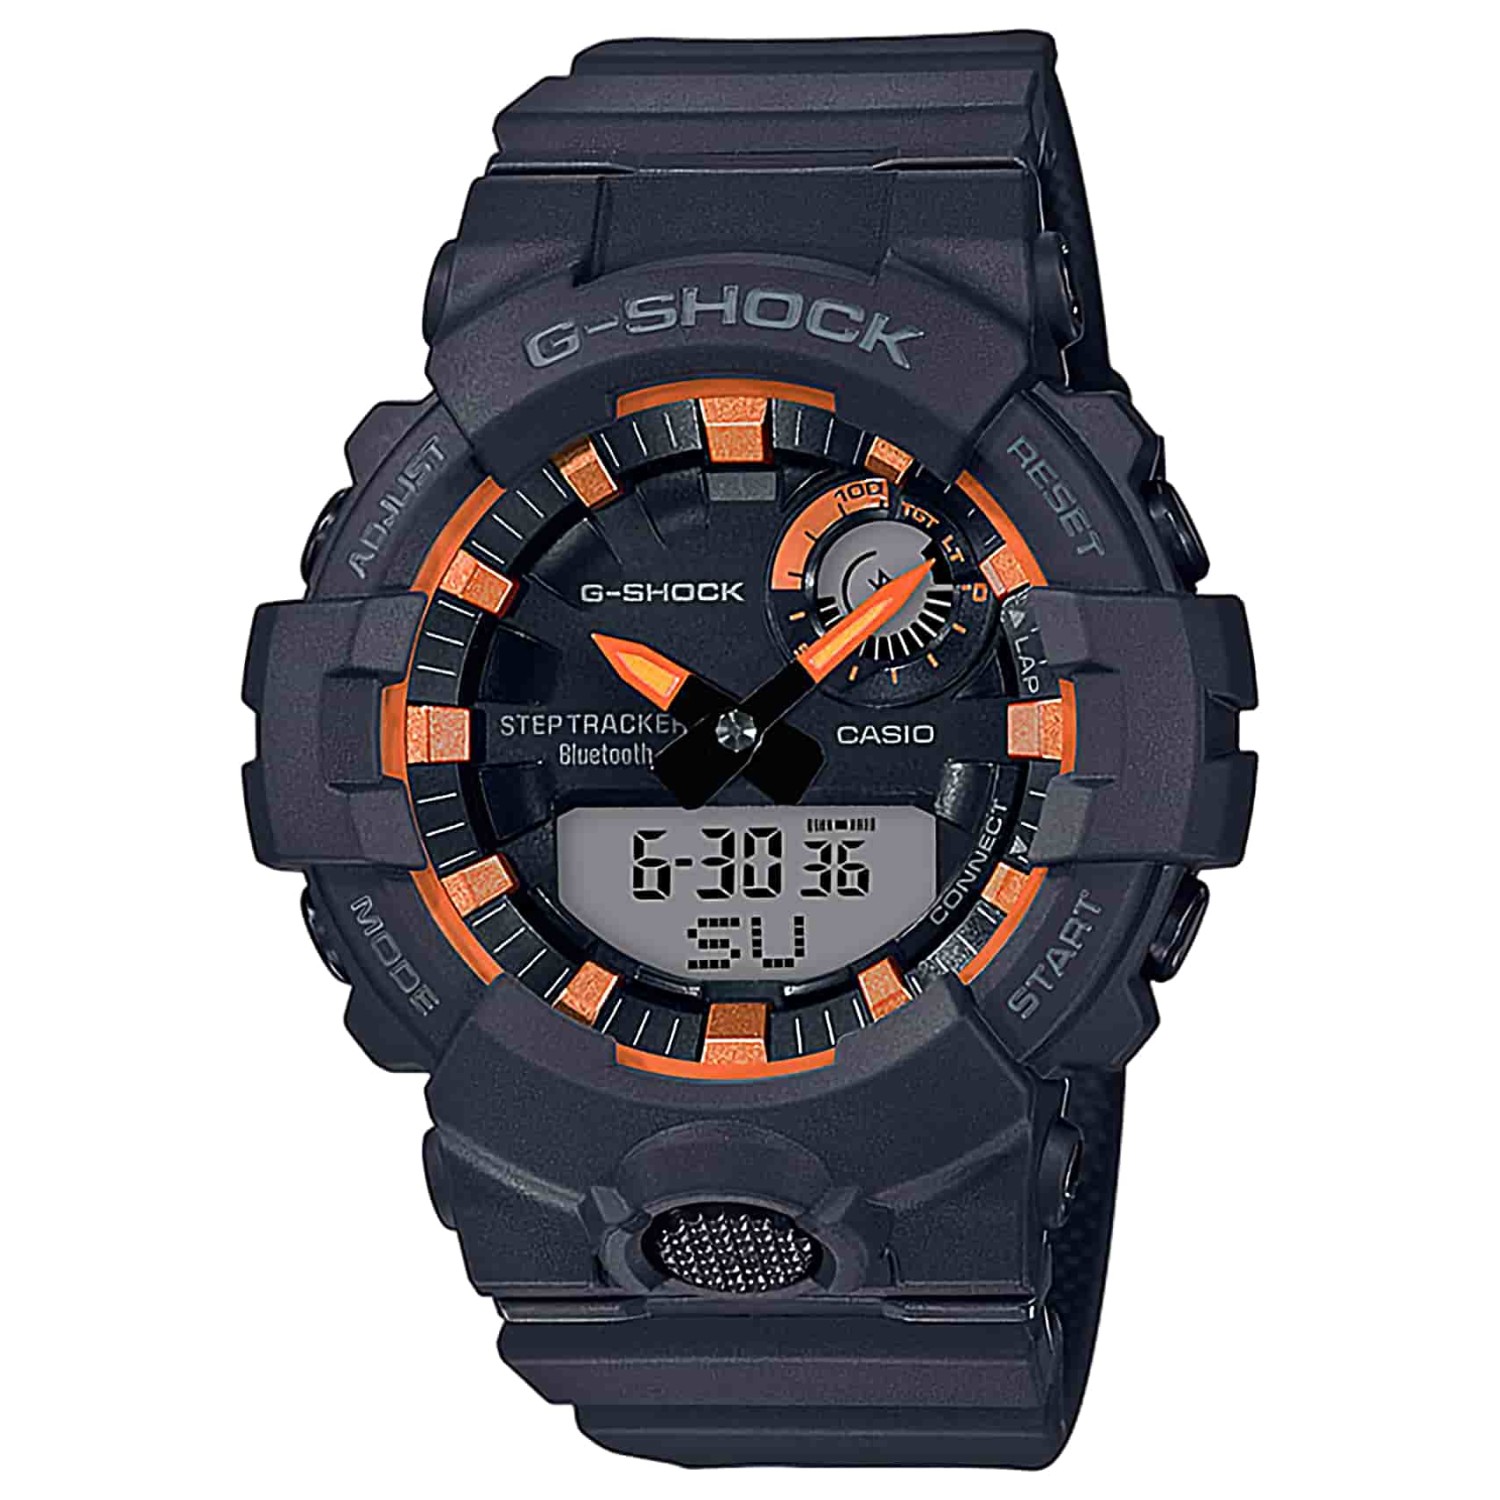 GBA800SF-1A G-SHOCK G-Squad Sports Watch. This new G-SQUAD GBA-800 model is the latest additions to the G-SHOCK lineup of watches that are constantly setting new standards for timekeeping toughness. The orange accent colouring of this model expresses adve